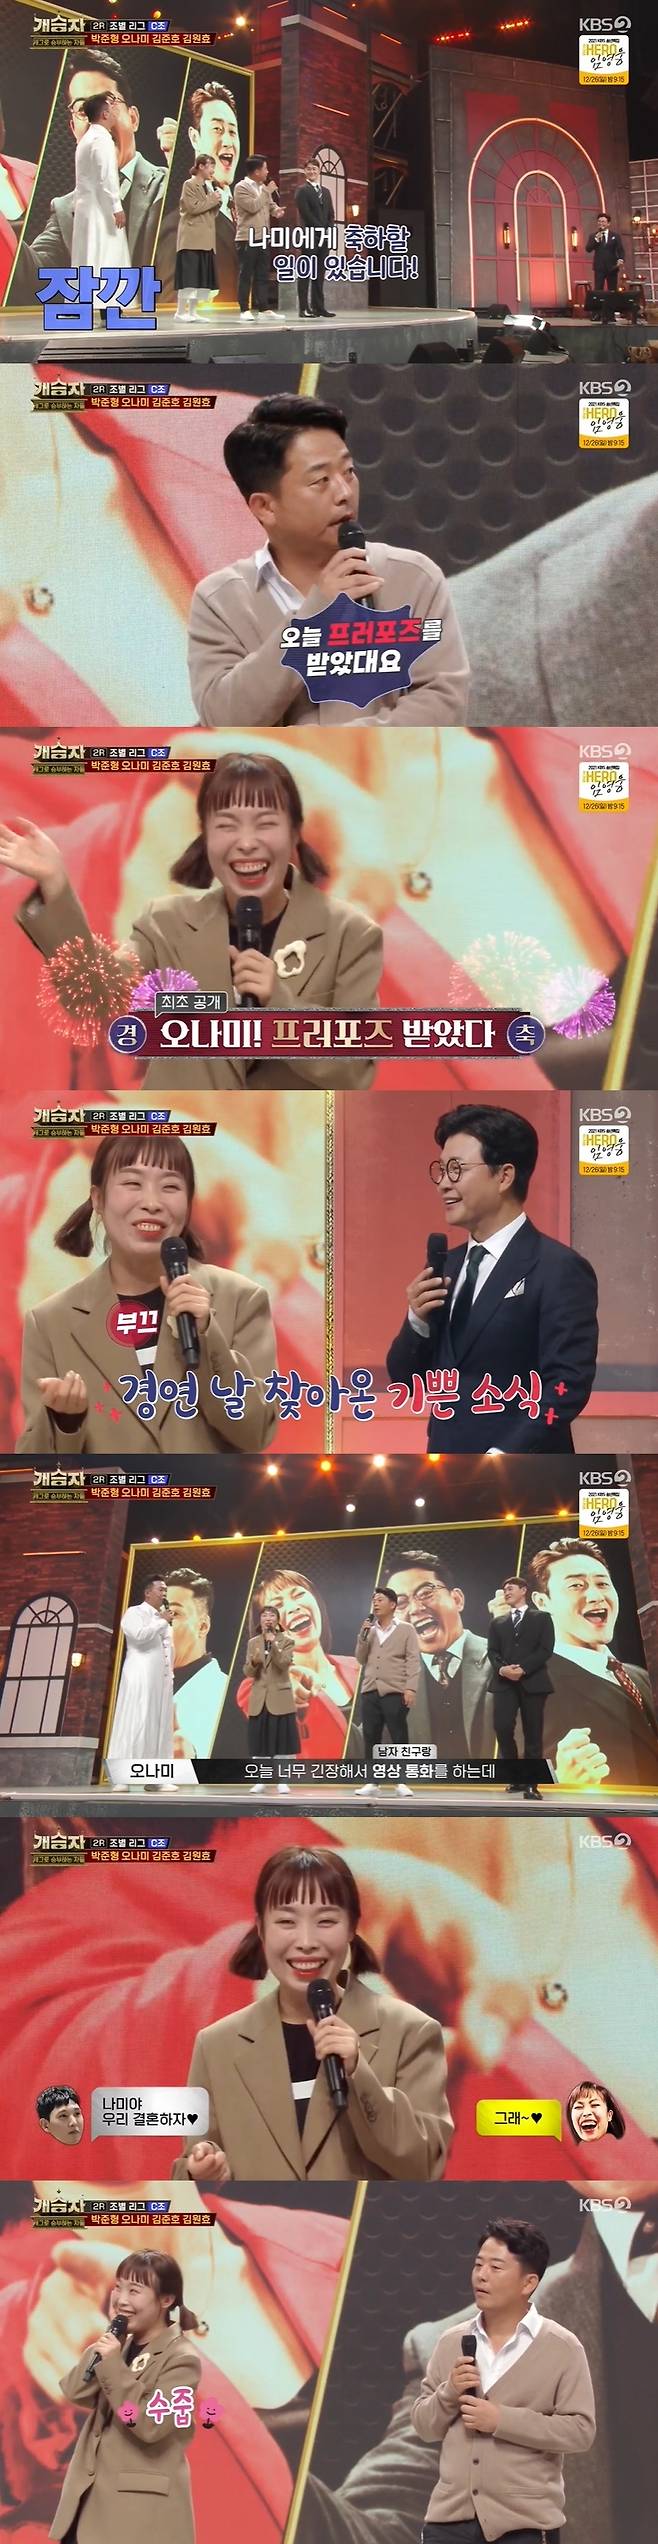 Oh Nami reveals he was proposed by former footballer, 2-year-old Boy Friend Park MinOn KBS 2TVs Winners & Losers, which aired on December 11, team leaders Choon Park, Oh Nami, Kim Jun-ho and Kim Won-hyo, who were on a group stage mission in the second round, predicted a fierce confrontation.Group C included two entertainment awards in 2003, Joon Park and Kim Jun-ho in 2013, which led to a formidable battle before the contest.Oh Nami expressed his respect for Jun Hyung has a lot of years and knows the flow of the generation and respects the ideas of his juniors very much. Kim Wonhyo said, Kim Jun-ho is a senior who respects his juniors like Yoo Jae-seok.I respect him and then suddenly compete.On stage, Kim Jun-ho said, I have something to celebrate with Nami. I received a proposal today.Oh Nami was shy with a smile at the sudden Kim Jun-ho revelation.